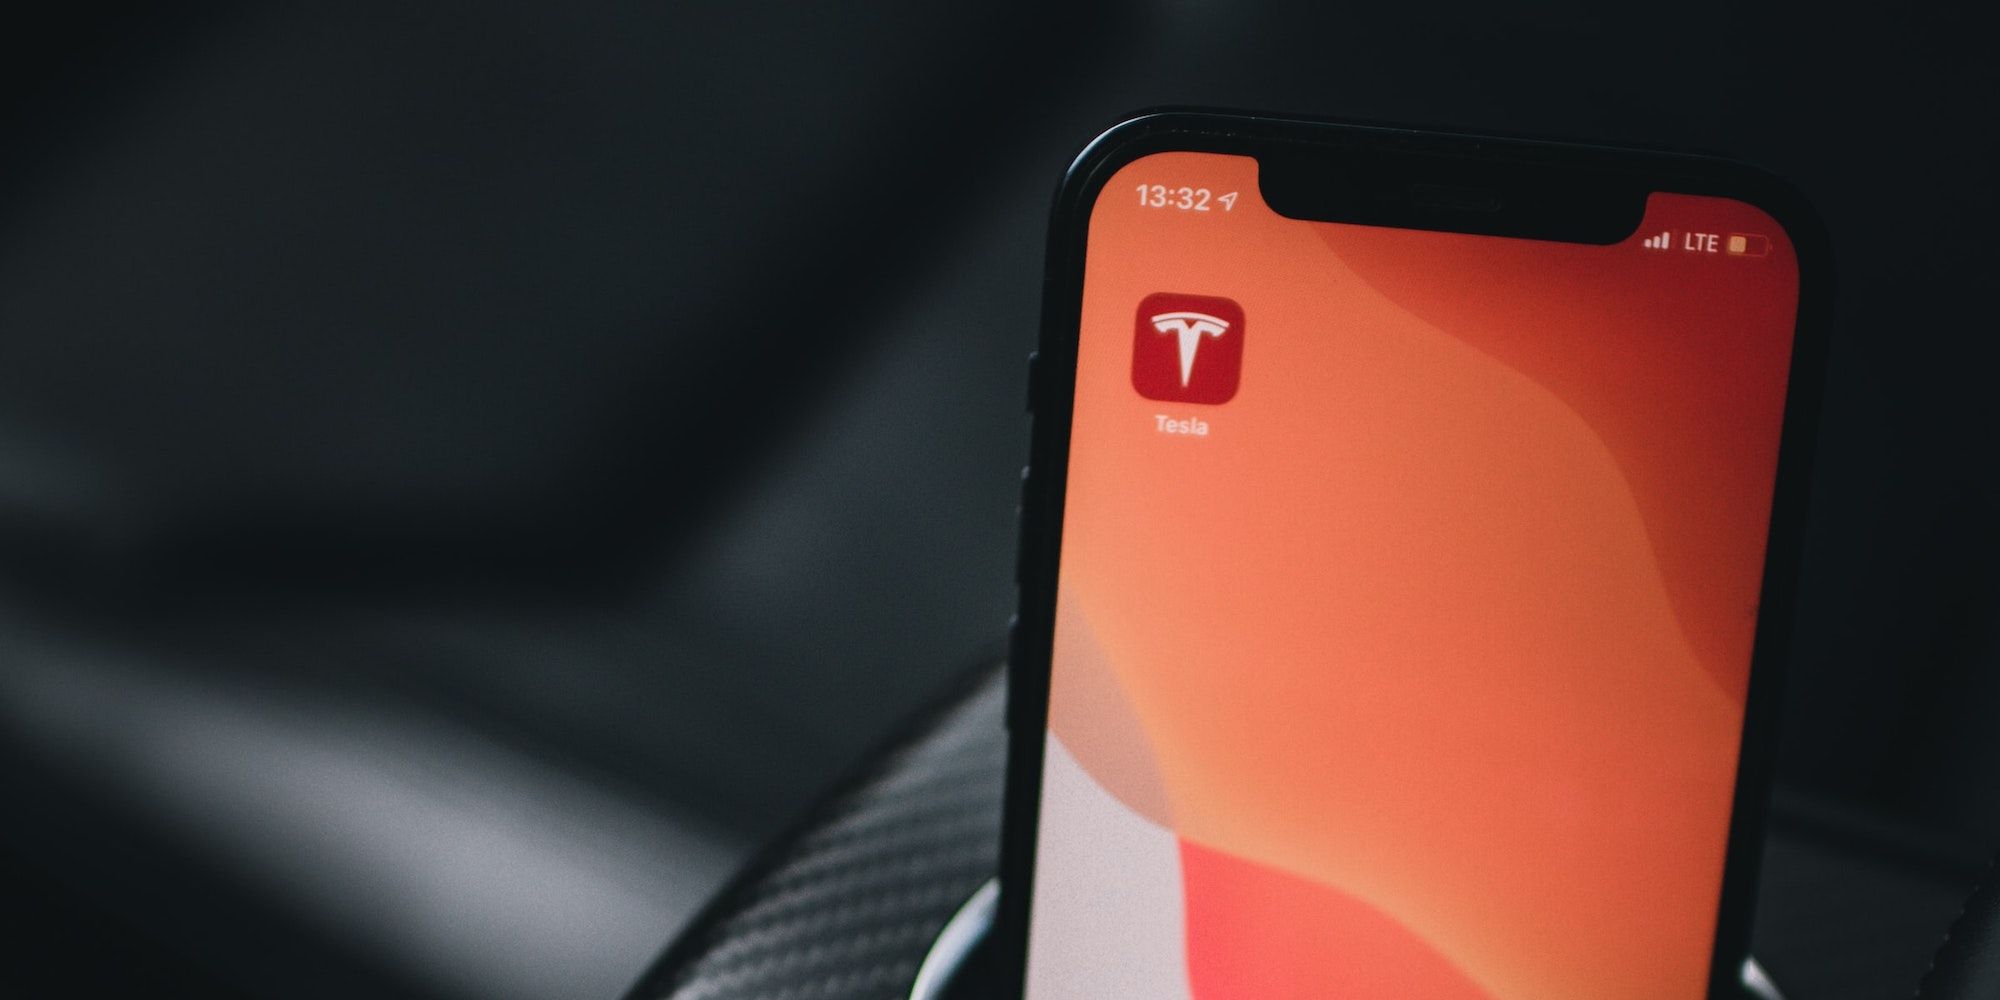 The Tesla app icon on an iPhone screen